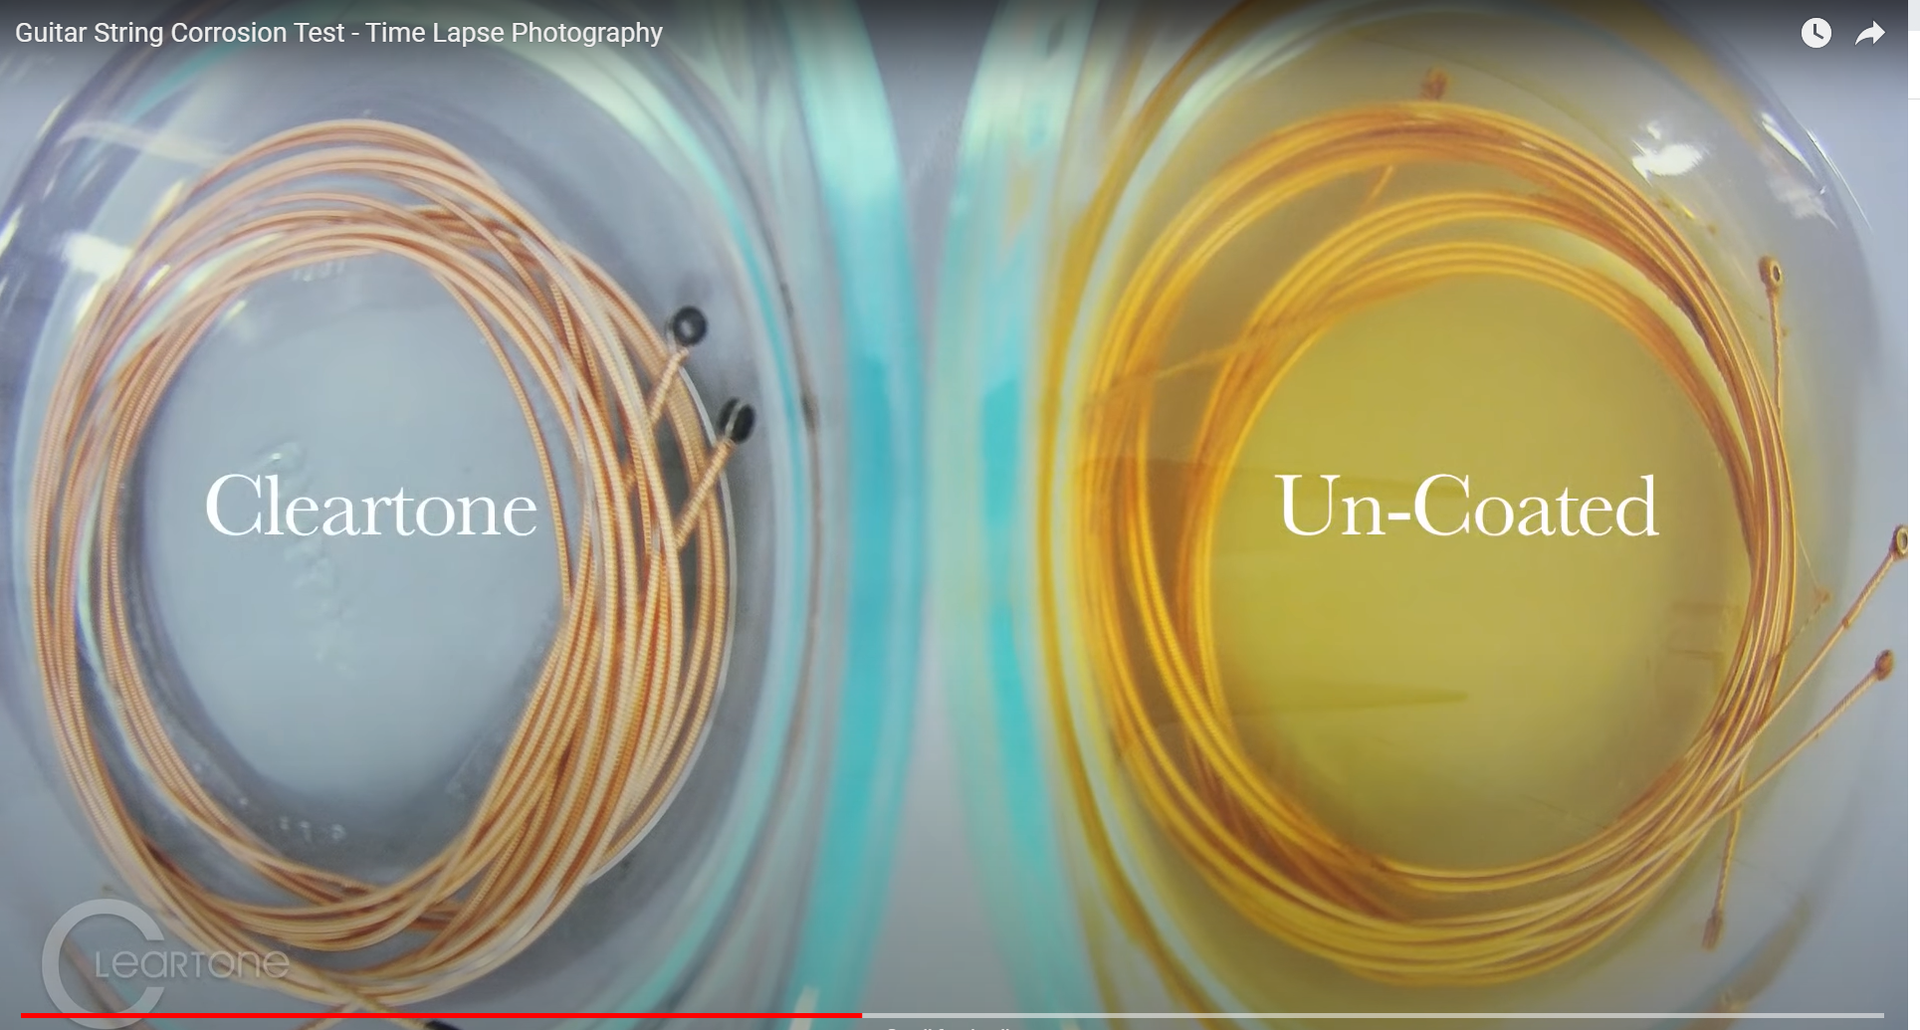 Load video: Time-lapse video of a corrosion test conducted by submerging Cleartone coated guitar strings in water alongside a set of uncoated guitar strings, which shows the uncoated strings becoming visibly damaged, while the Cleartone set appears unaffected.